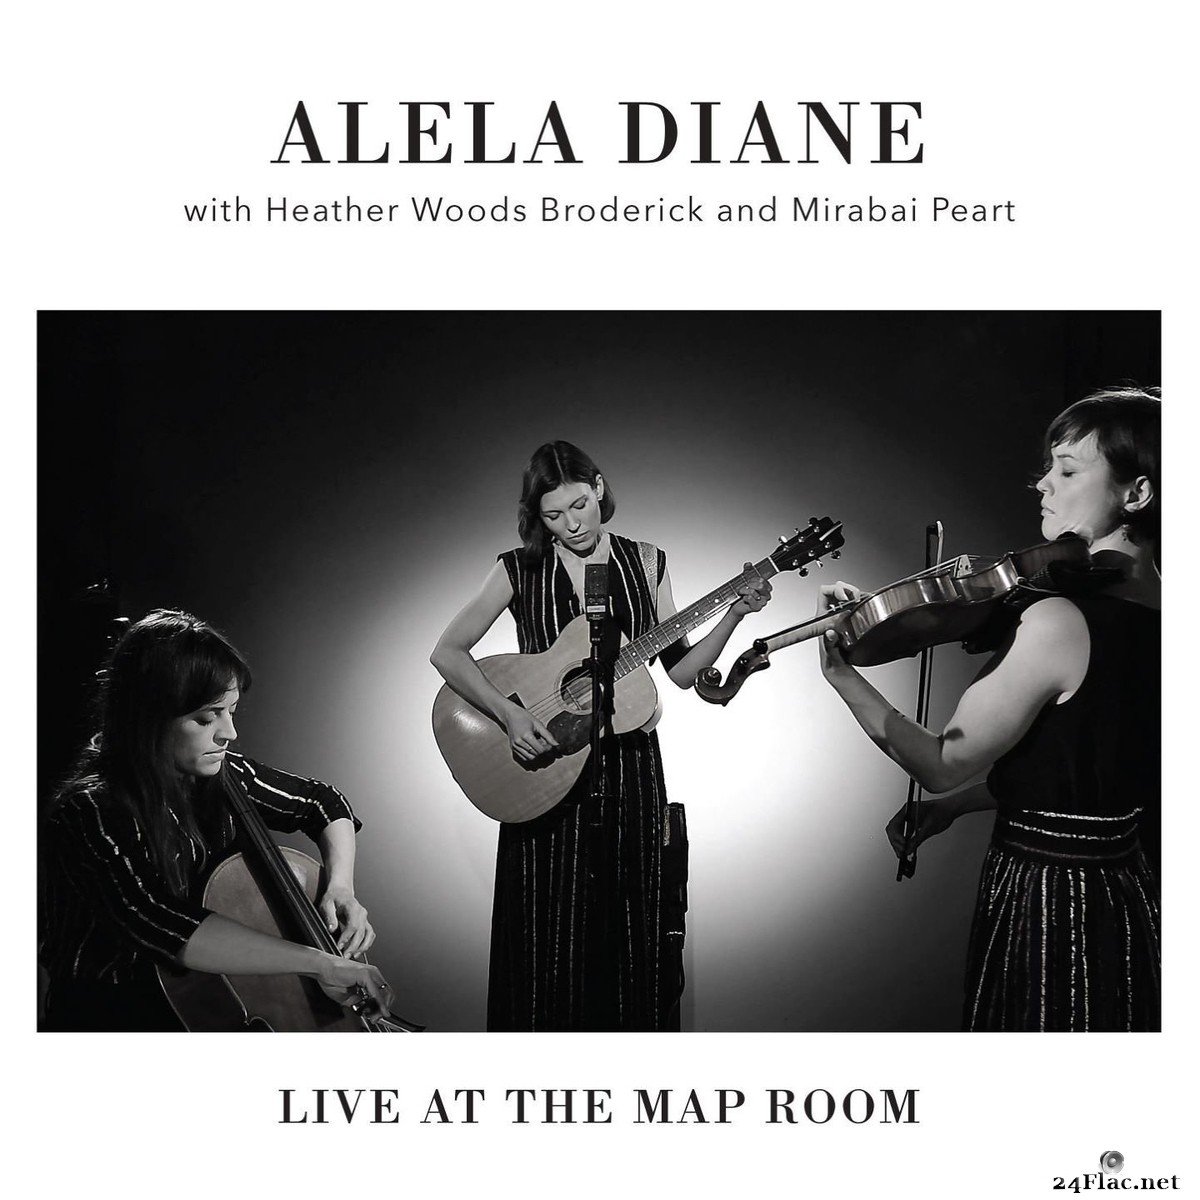 Alela Diane - Live at the Map Room (2021) FLAC